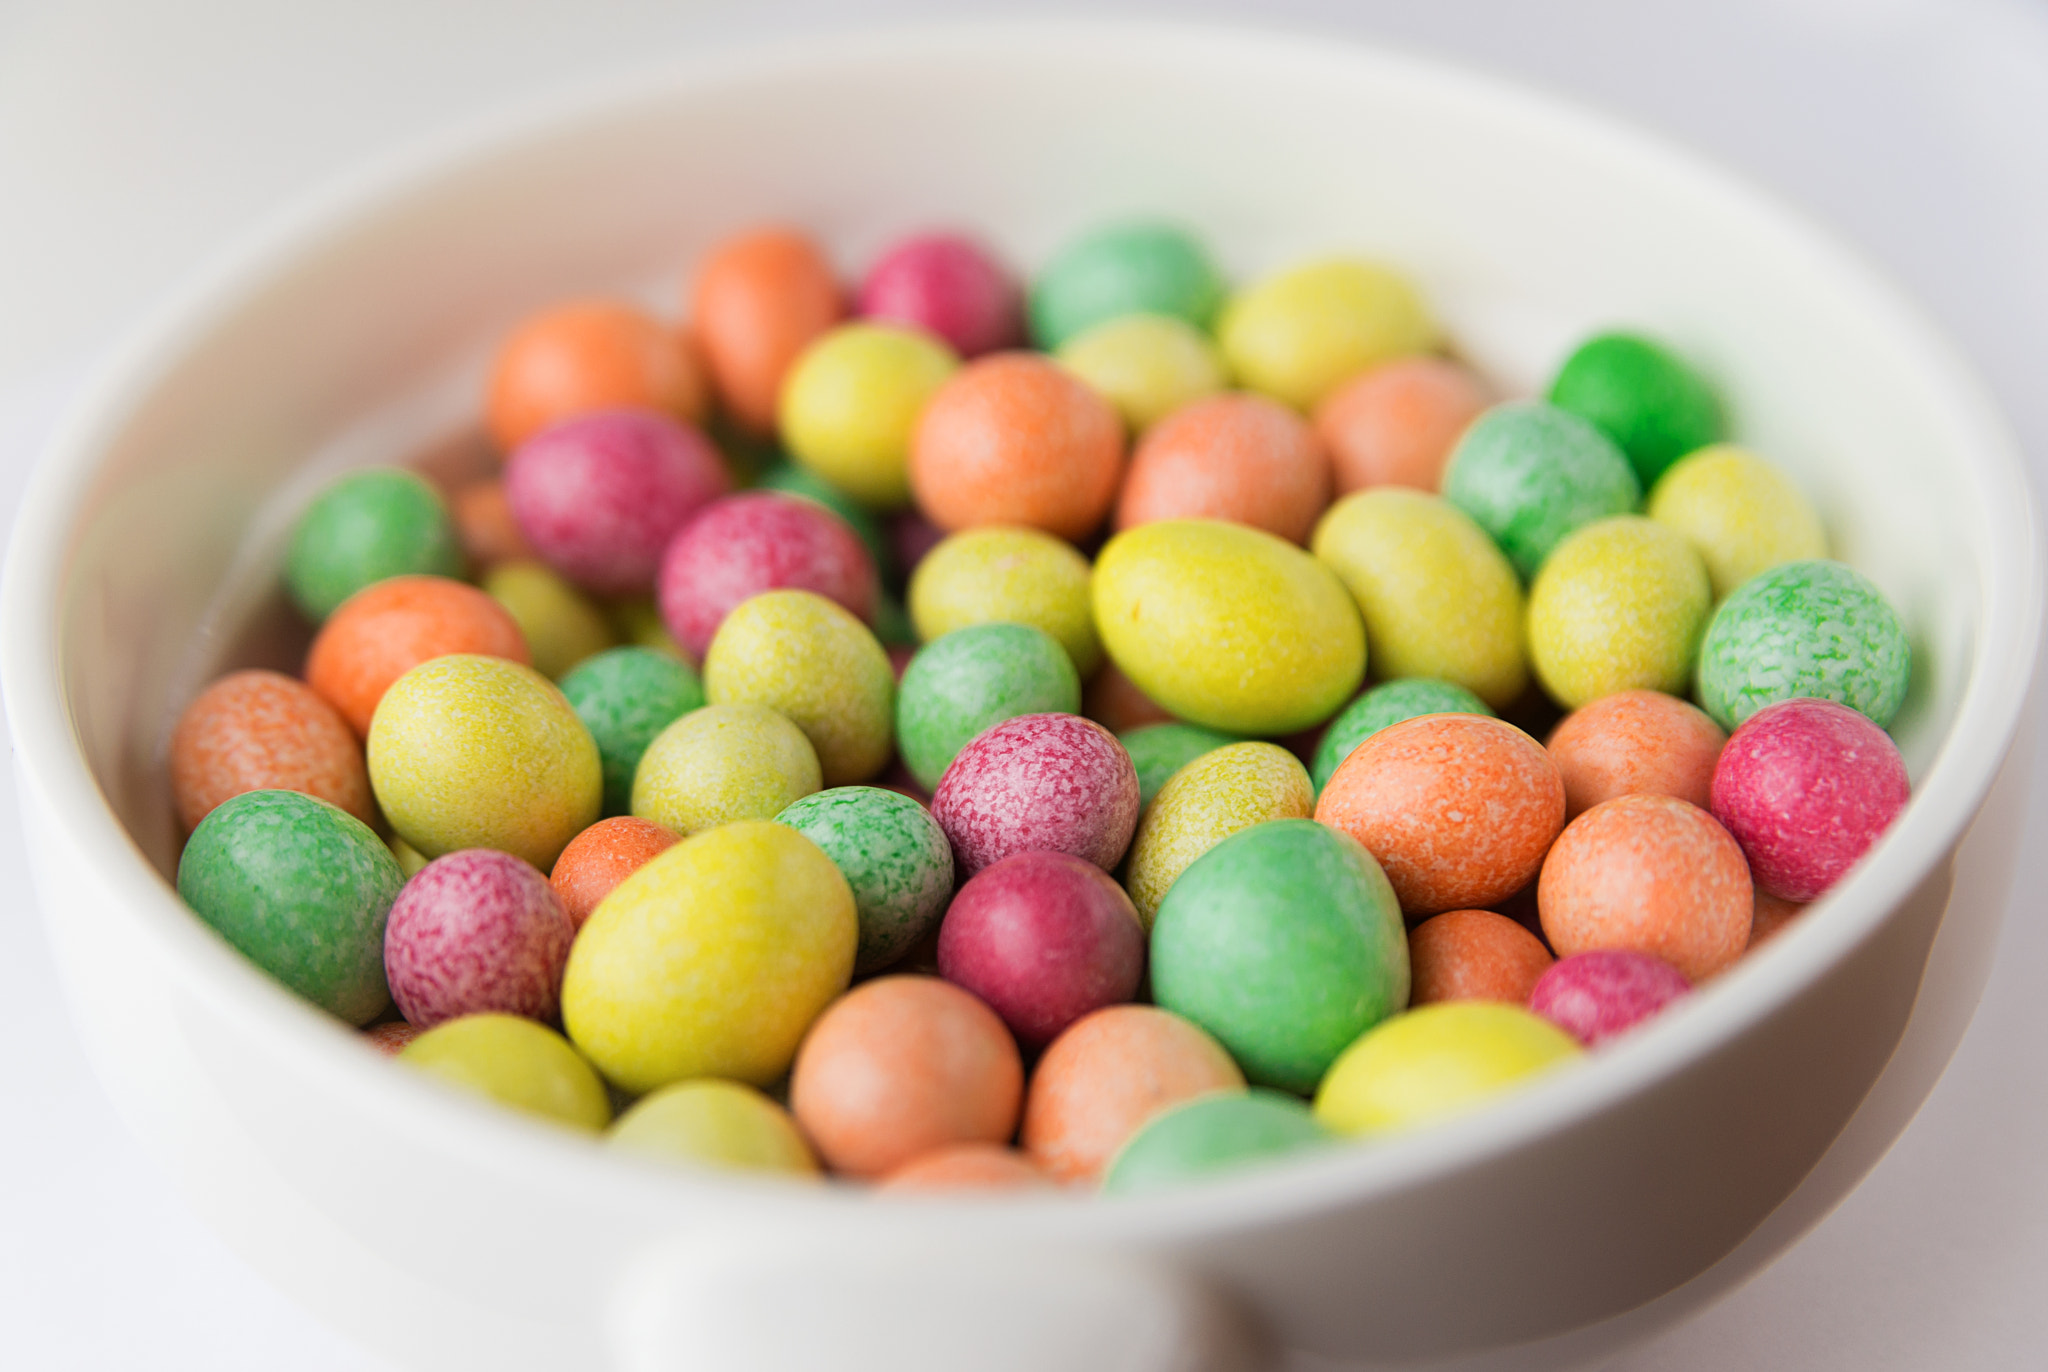 Nikon D800 + Tamron AF 28-75mm F2.8 XR Di LD Aspherical (IF) sample photo. Many colorful jelly beans in a sweet glaze photography